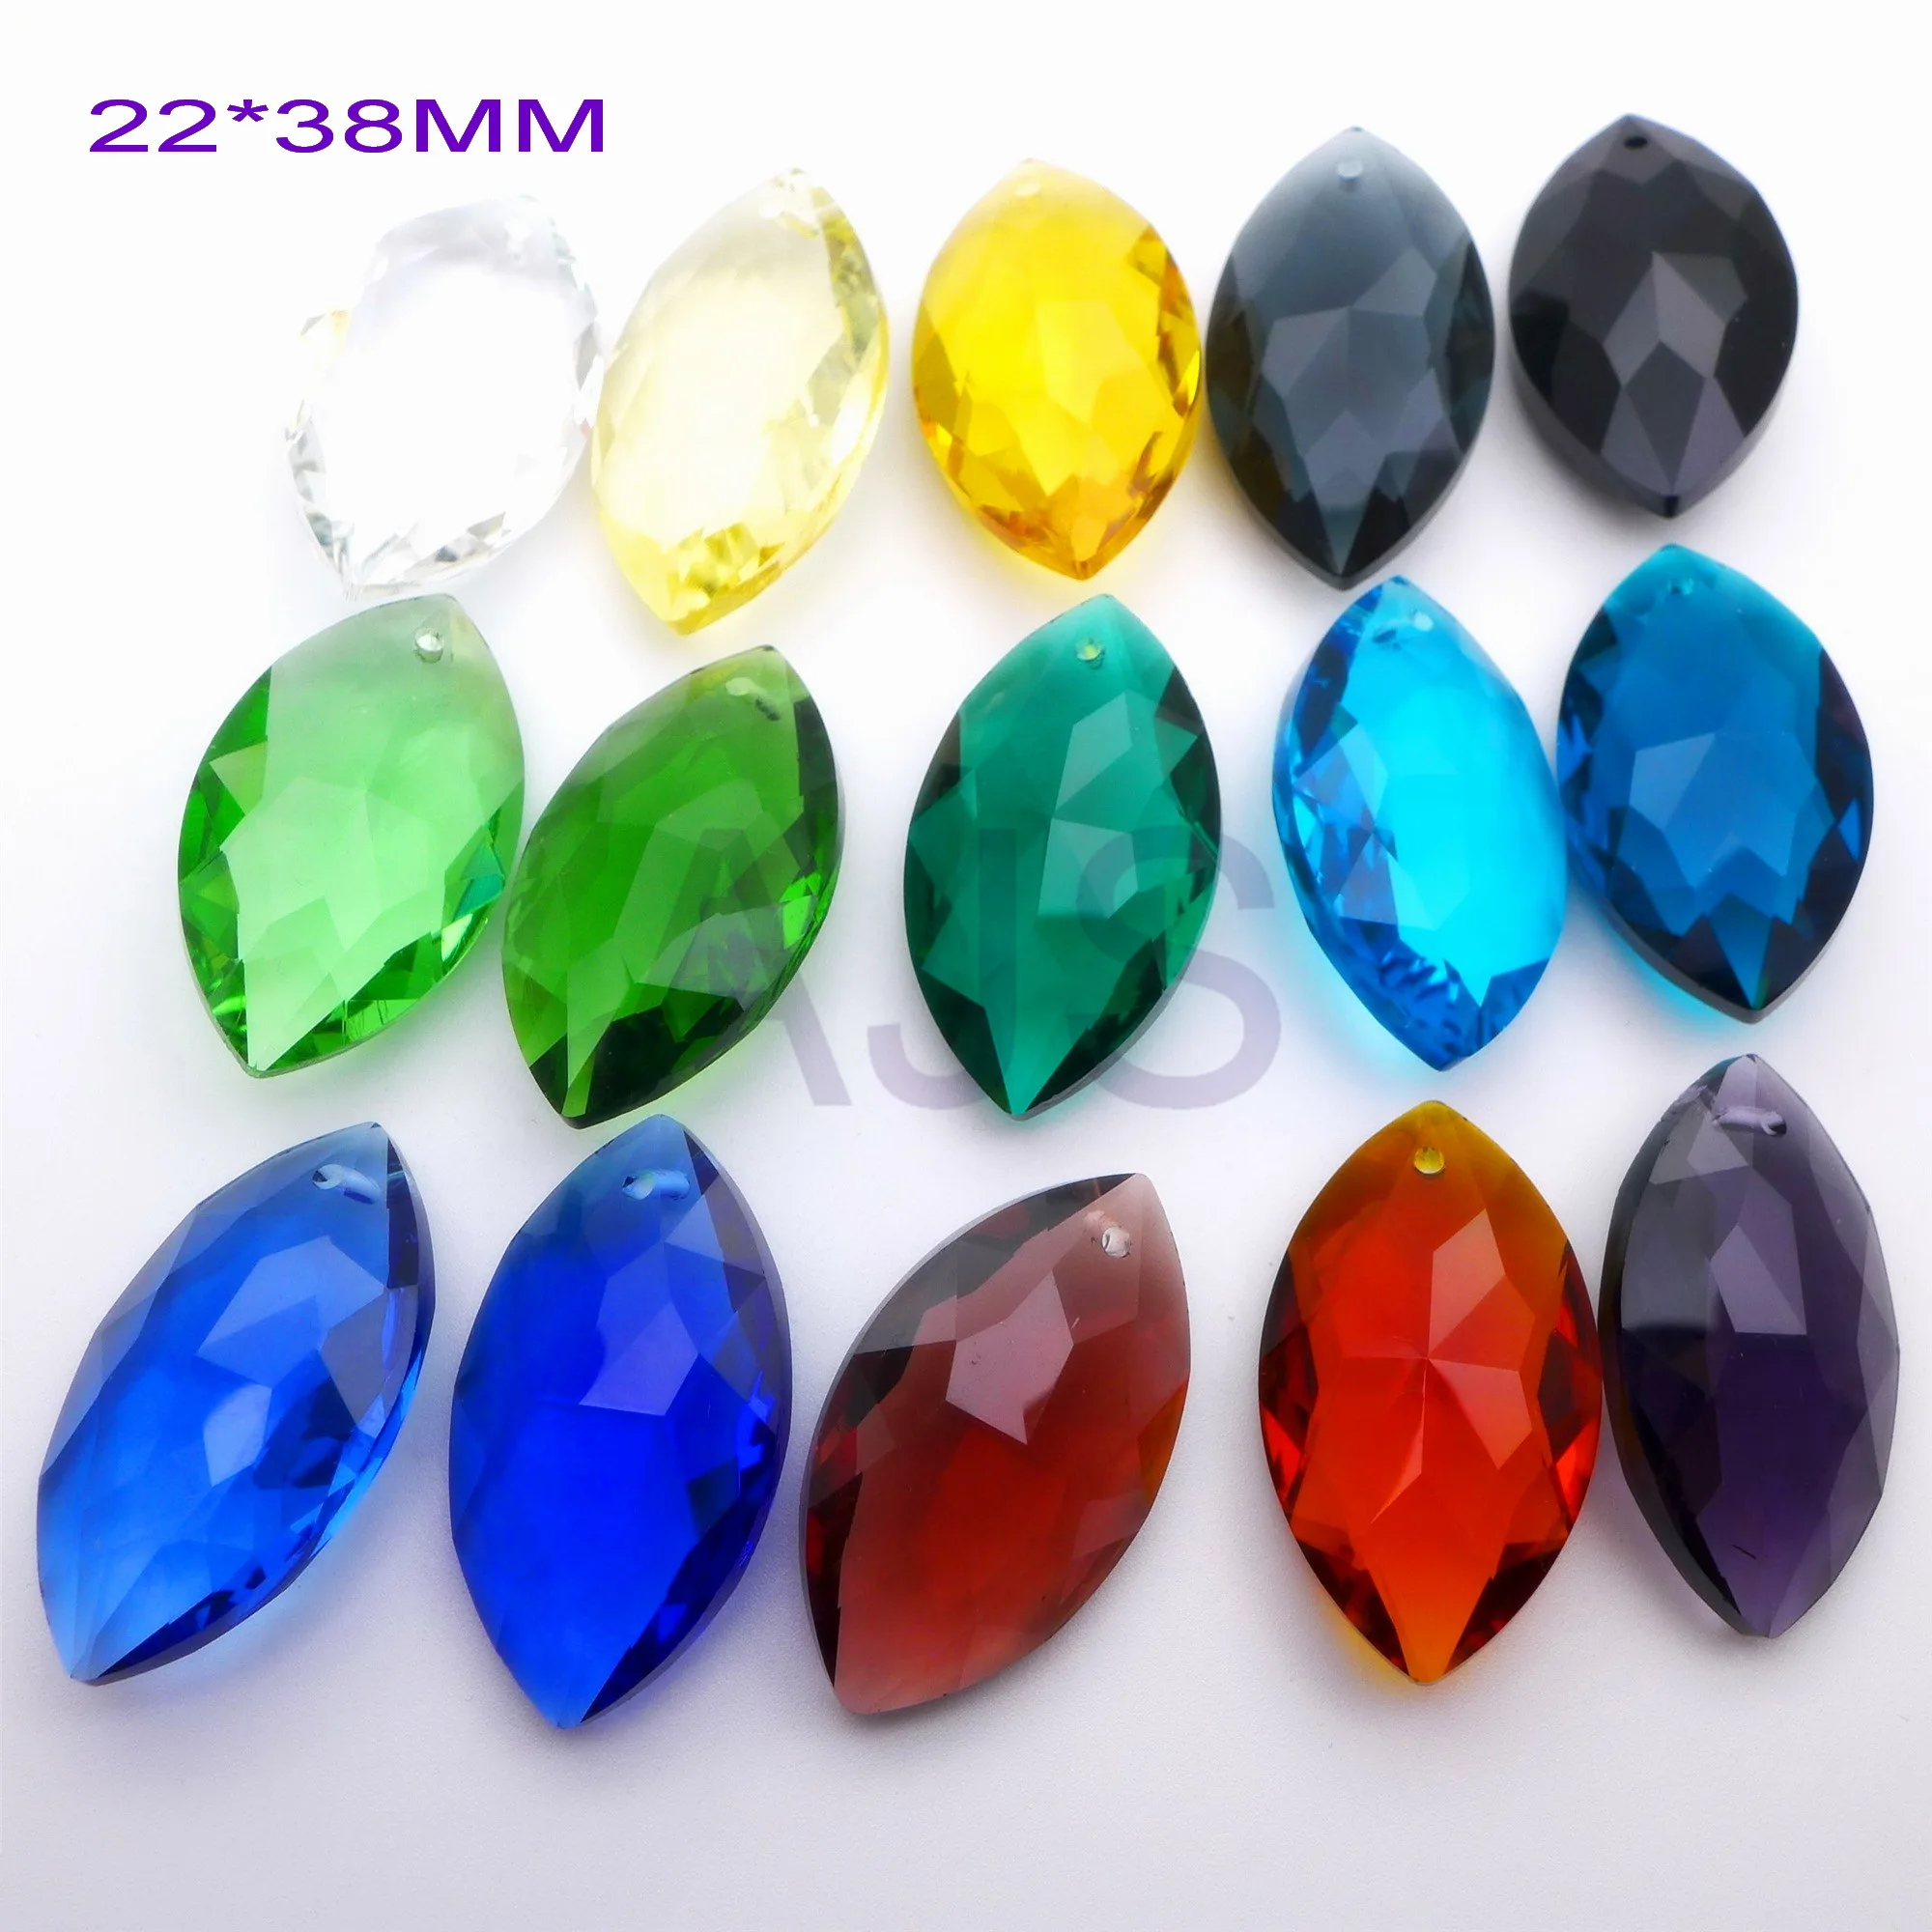 

12pcs 22*38MM Crystal Faceted 7600 Olive Horse Eye Shape Pendants Jewelry Earrings Necklace Decoration AB Moonlight Free Shippin